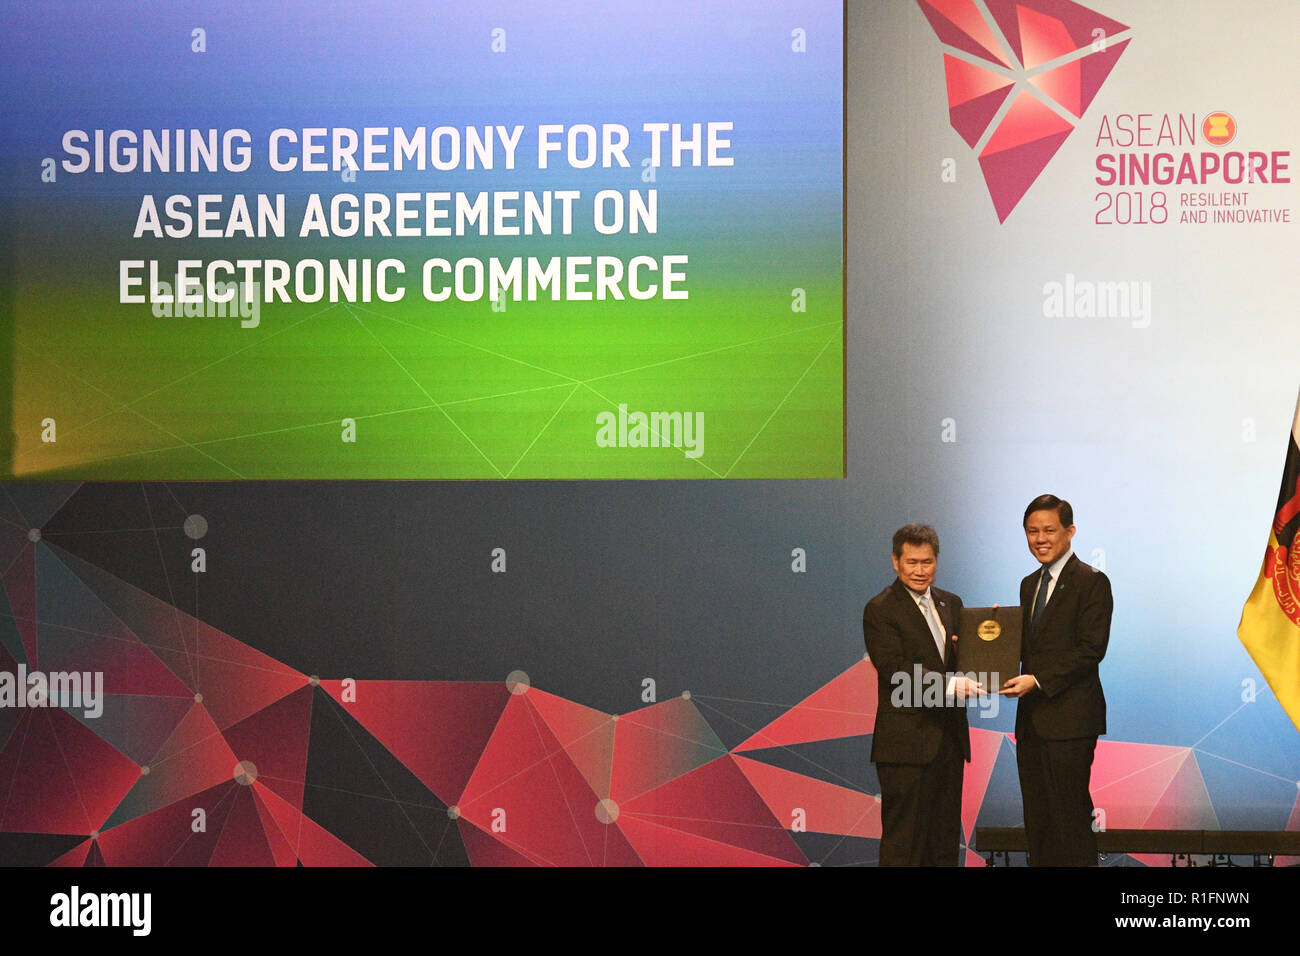 Singapore, Singapore. 12th Nov, 2018. Singaporean Minister for Trade and Industry Chan Chun Sing (R) hands over the signed document to ASEAN Secretary General Lim Jock Hoi during the signing ceremony of ASEAN's agreement on e-commerce, in Singapore, on Nov. 12, 2018. Trade ministers of the Association of Southeast Asian Nations (ASEAN) member states signed an agreement on e-commerce on Monday, encouraging paperless trading between businesses and governments of the bloc to generate rapid and efficient transactions. Credit: Then Chih Wey/Xinhua/Alamy Live News Stock Photo